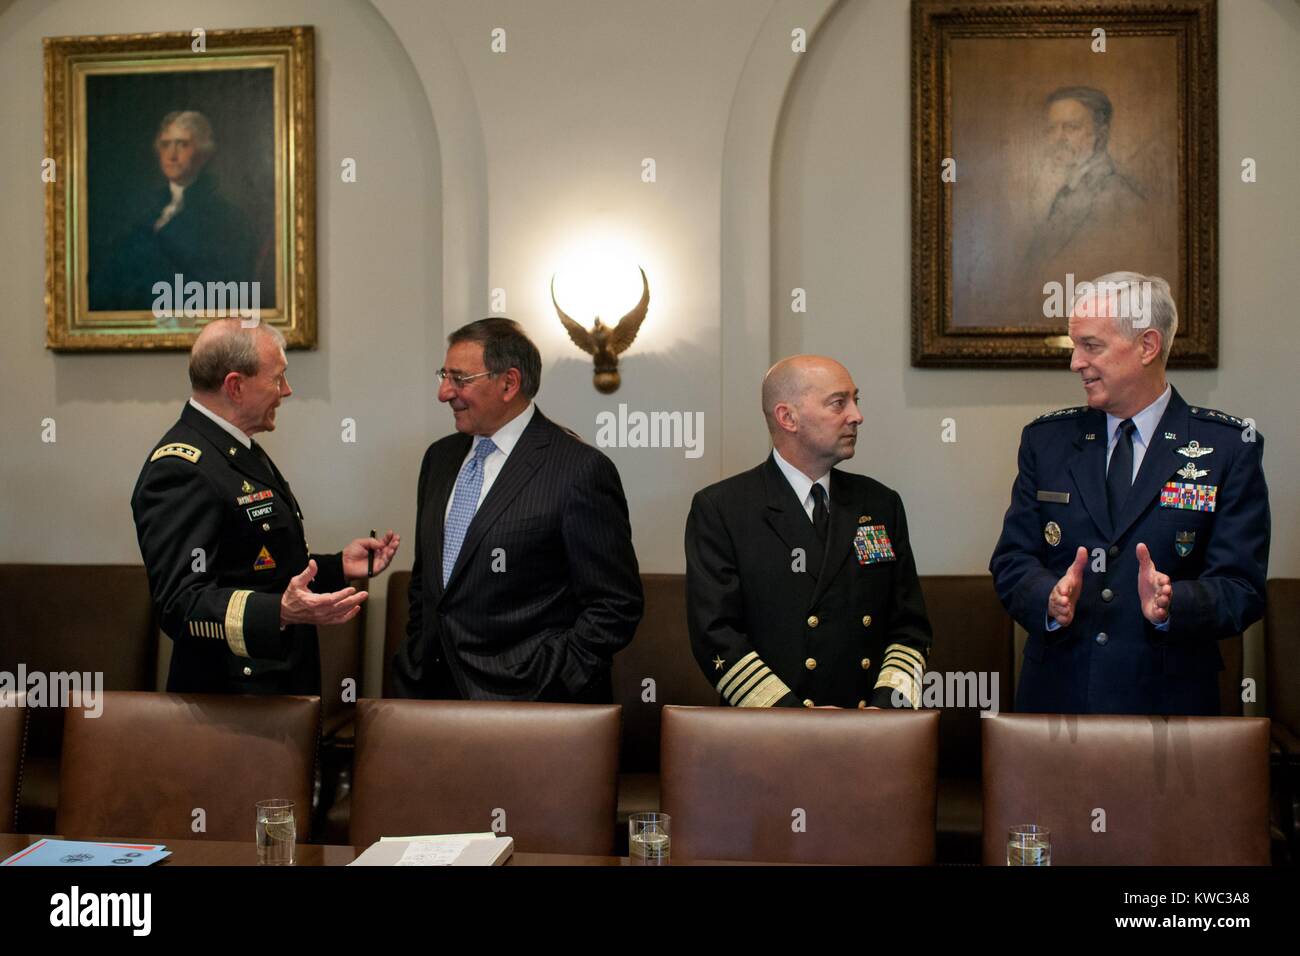 U.S. Military leaders before meeting with Combatant Commanders and senior military leadership. L-R: Gen. Martin Dempsey, Chrm, Joint Chiefs; Defense Sec. Leon Panetta; Adm. James Stavridis; and Gen. Douglas Fraser. Cabinet Room, White House, May 15, 2012. (BSLOC 2015 13 276) Stock Photo